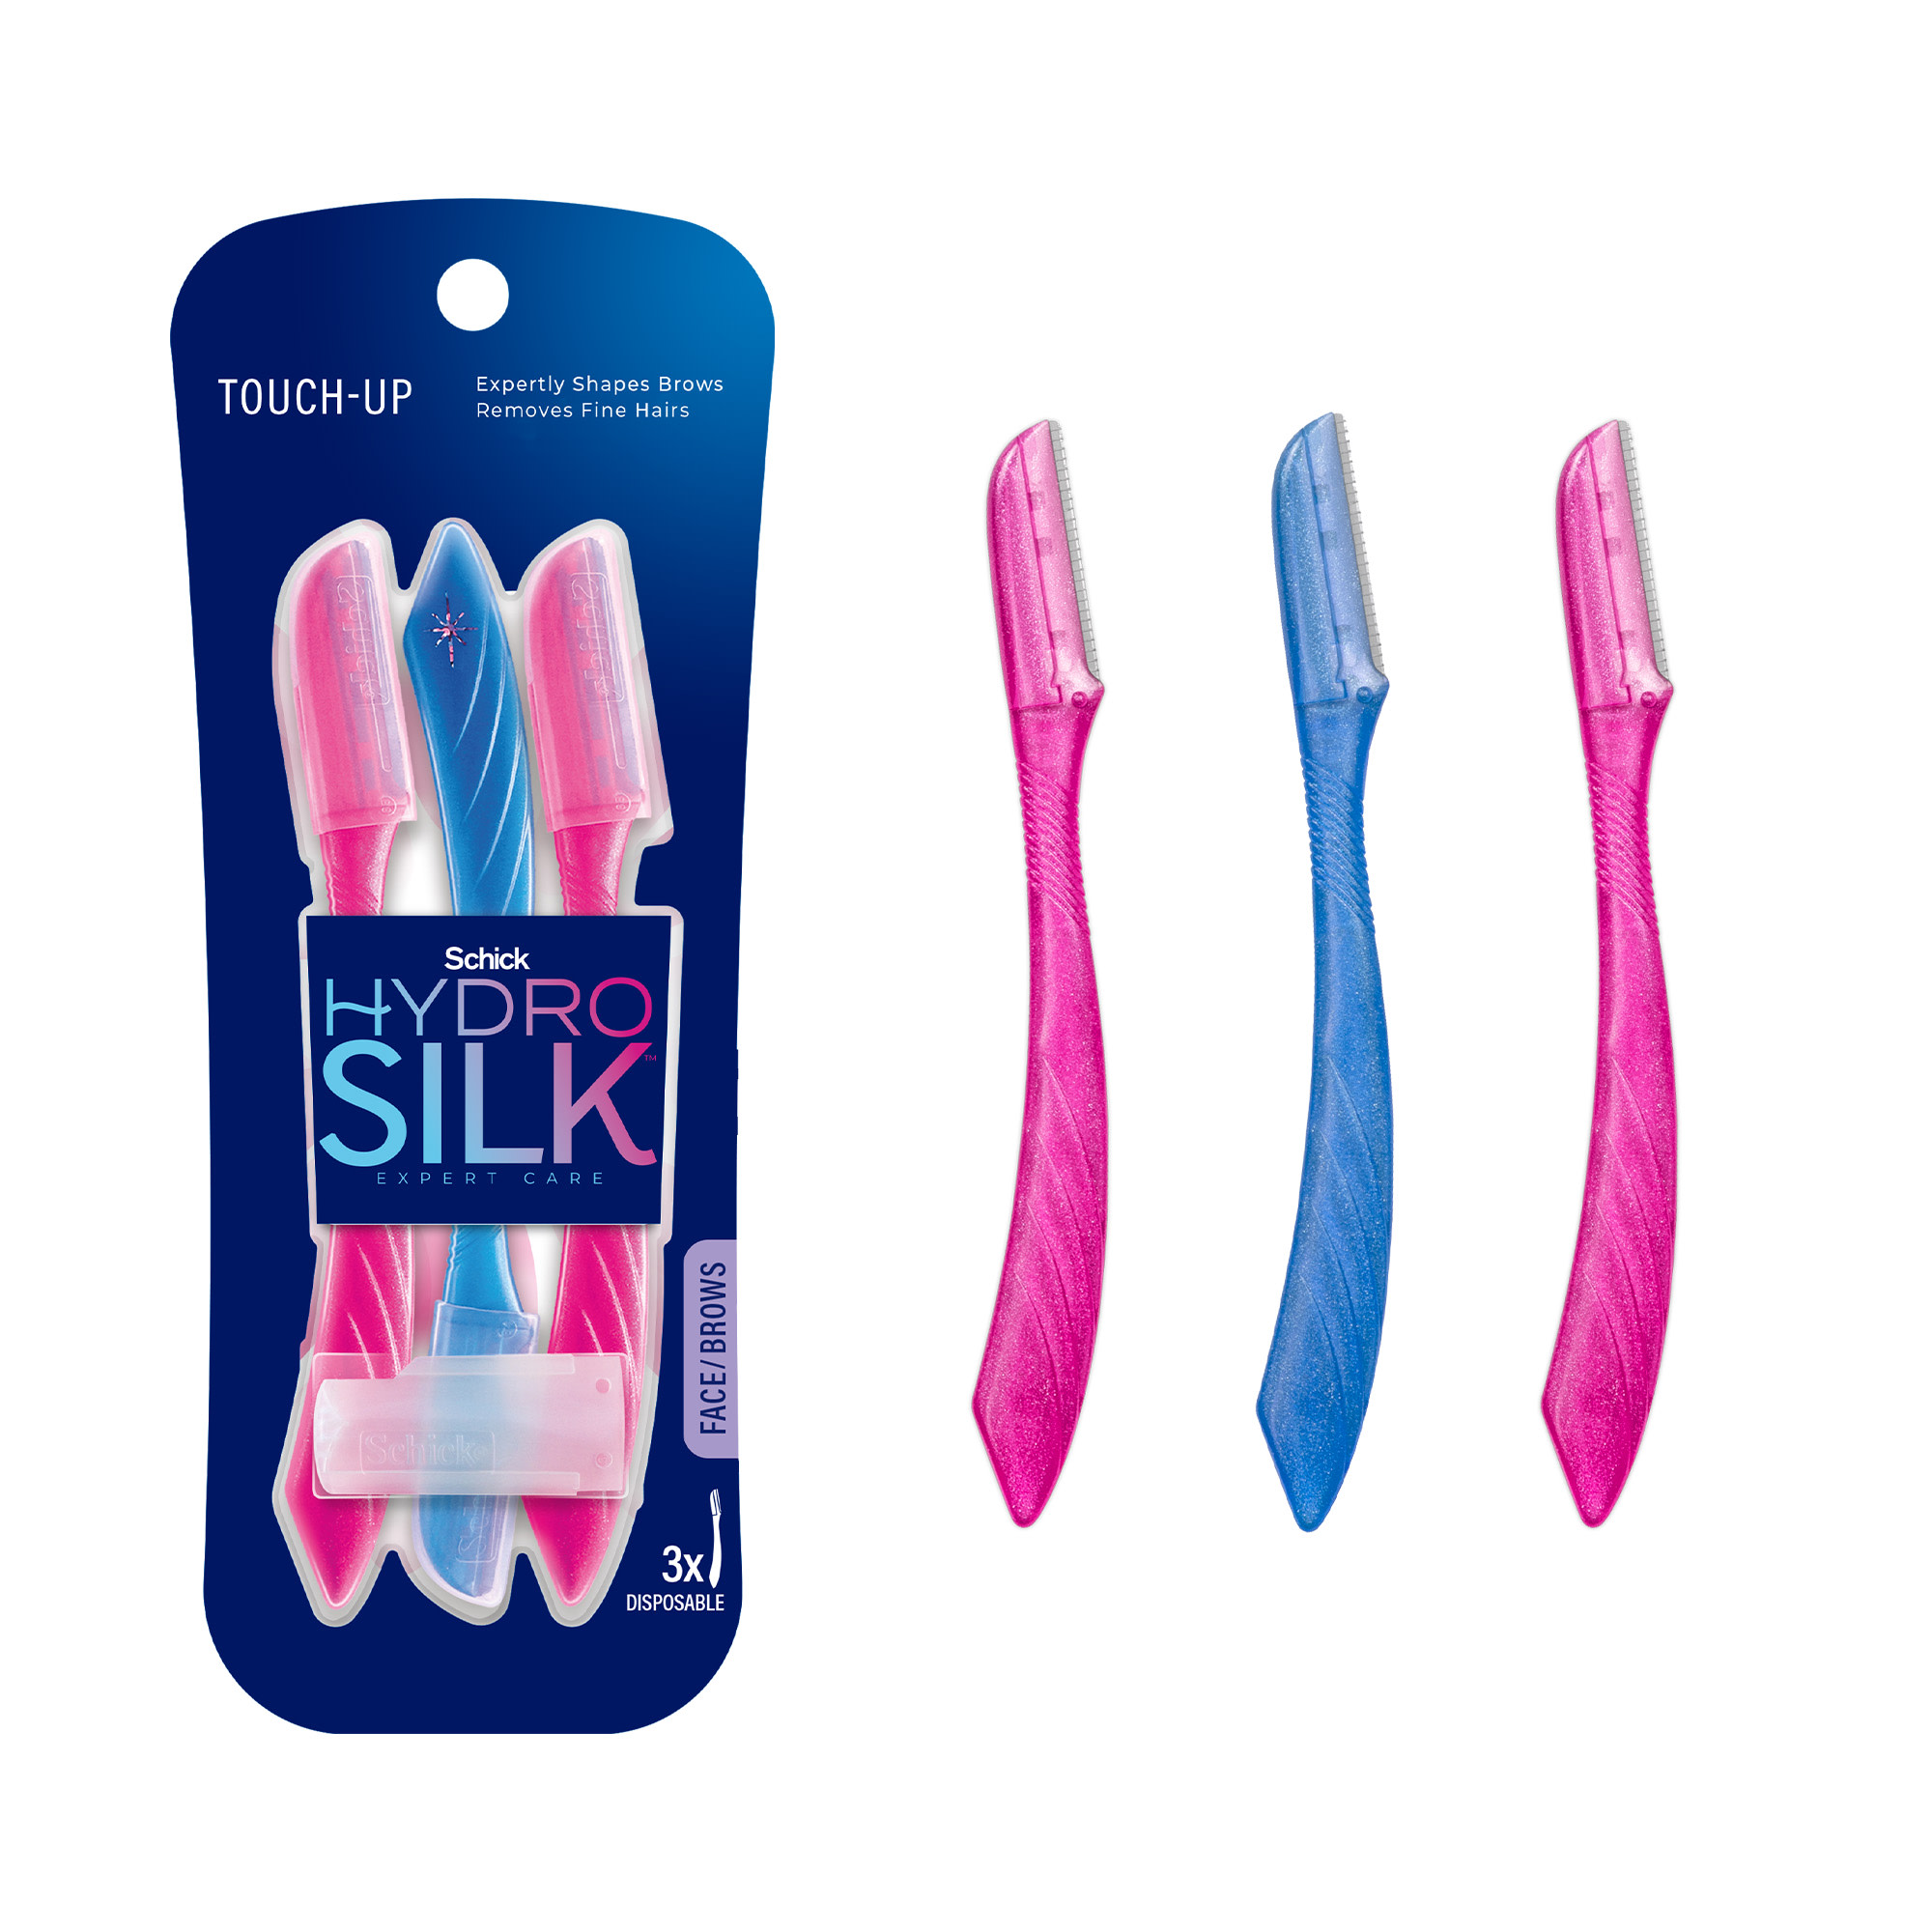 Schick Hydro Silk Touch-up Dermaplaning Tool with Precision Cover, 3 Ct, Womens Facial Razor & Eyebrow Razor - image 1 of 12